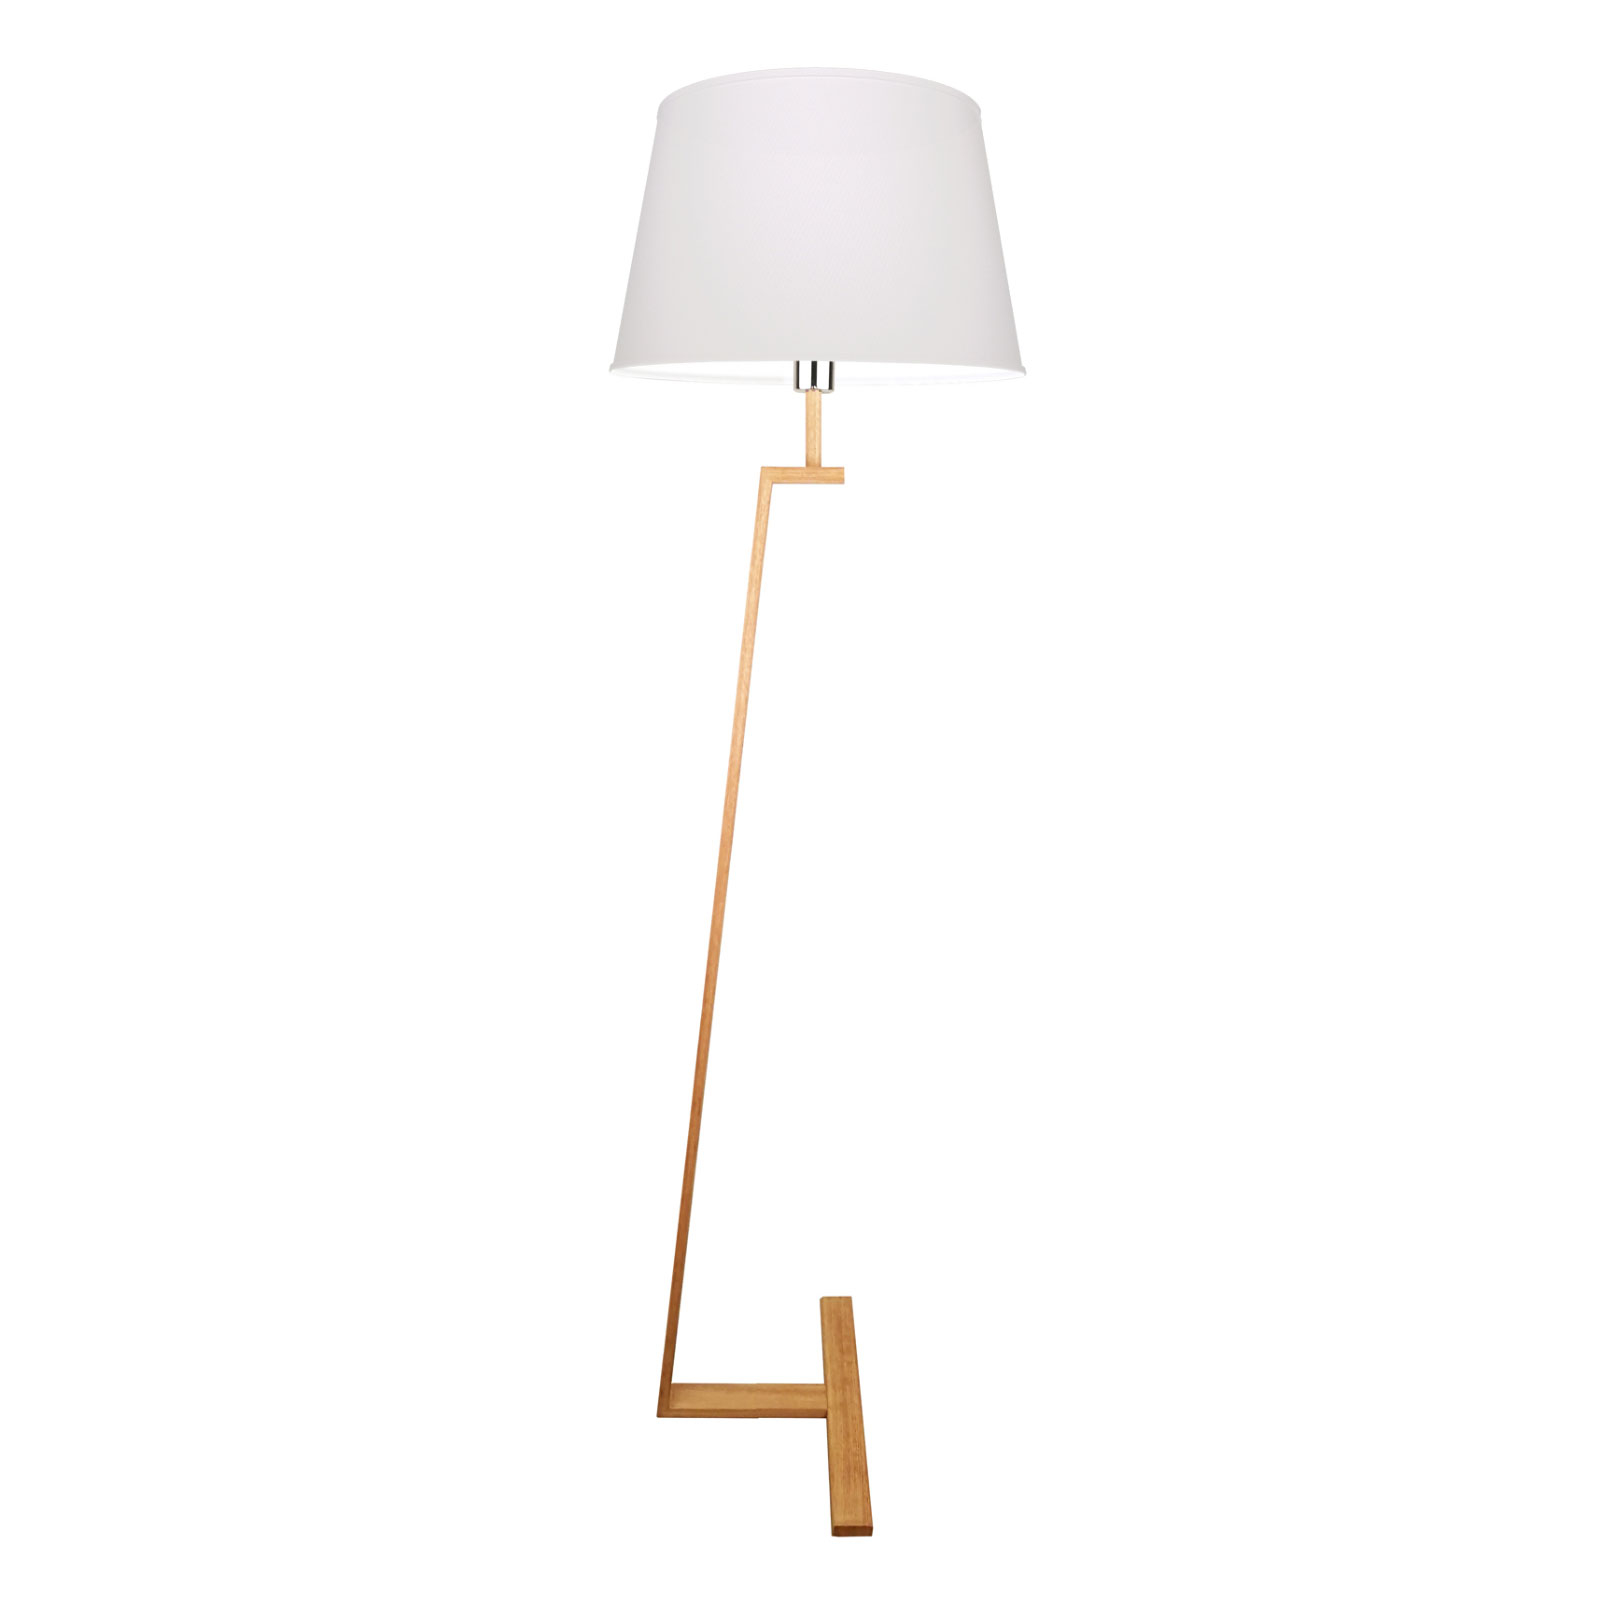 Memphis LS floor lamp with fabric lampshade, white